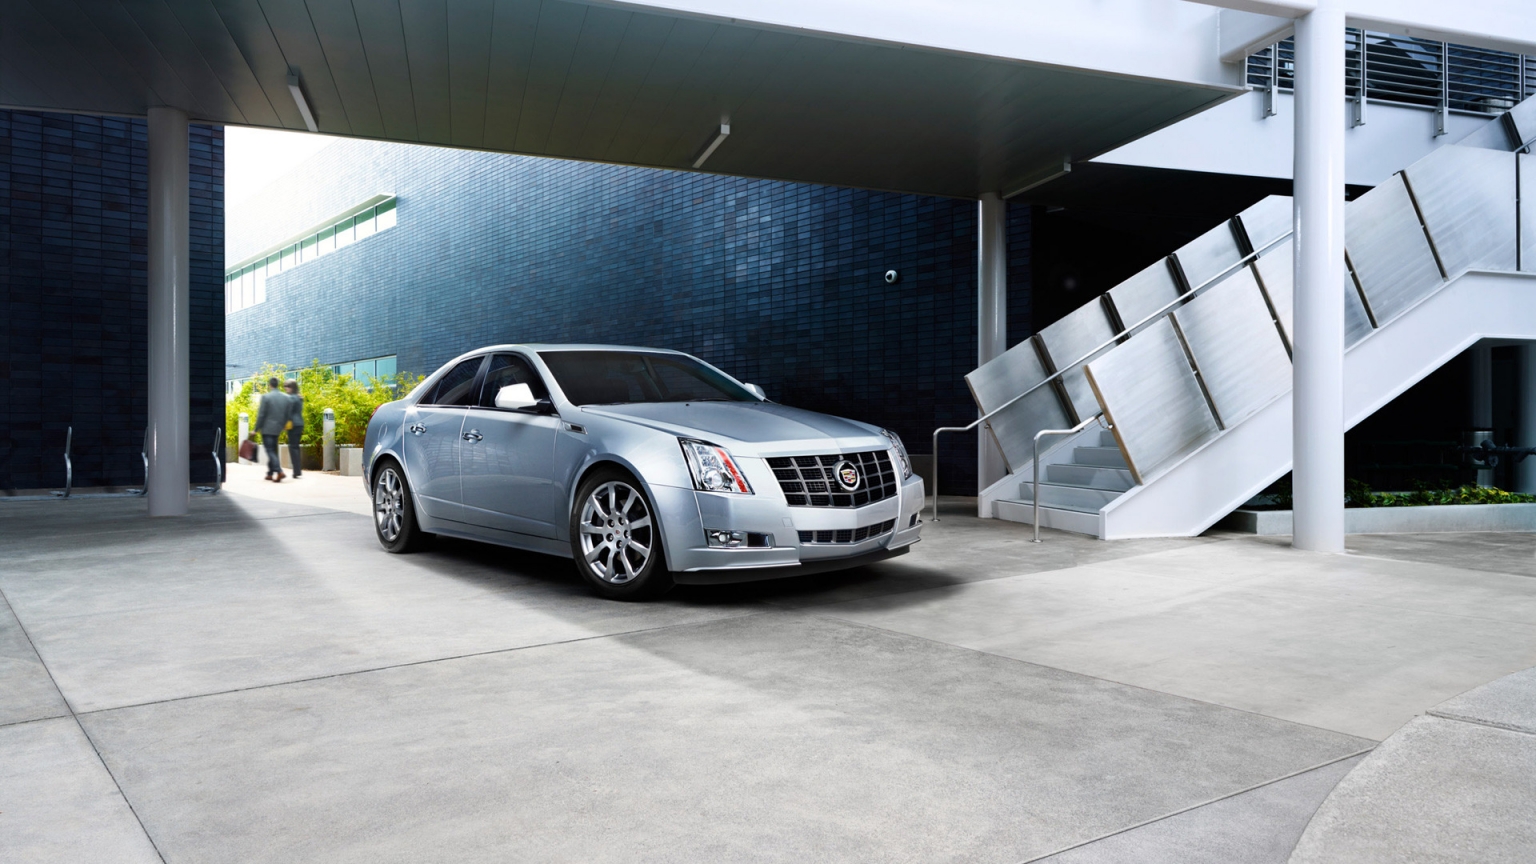 2012 Cadillac CTS Touring Edition for 1536 x 864 HDTV resolution